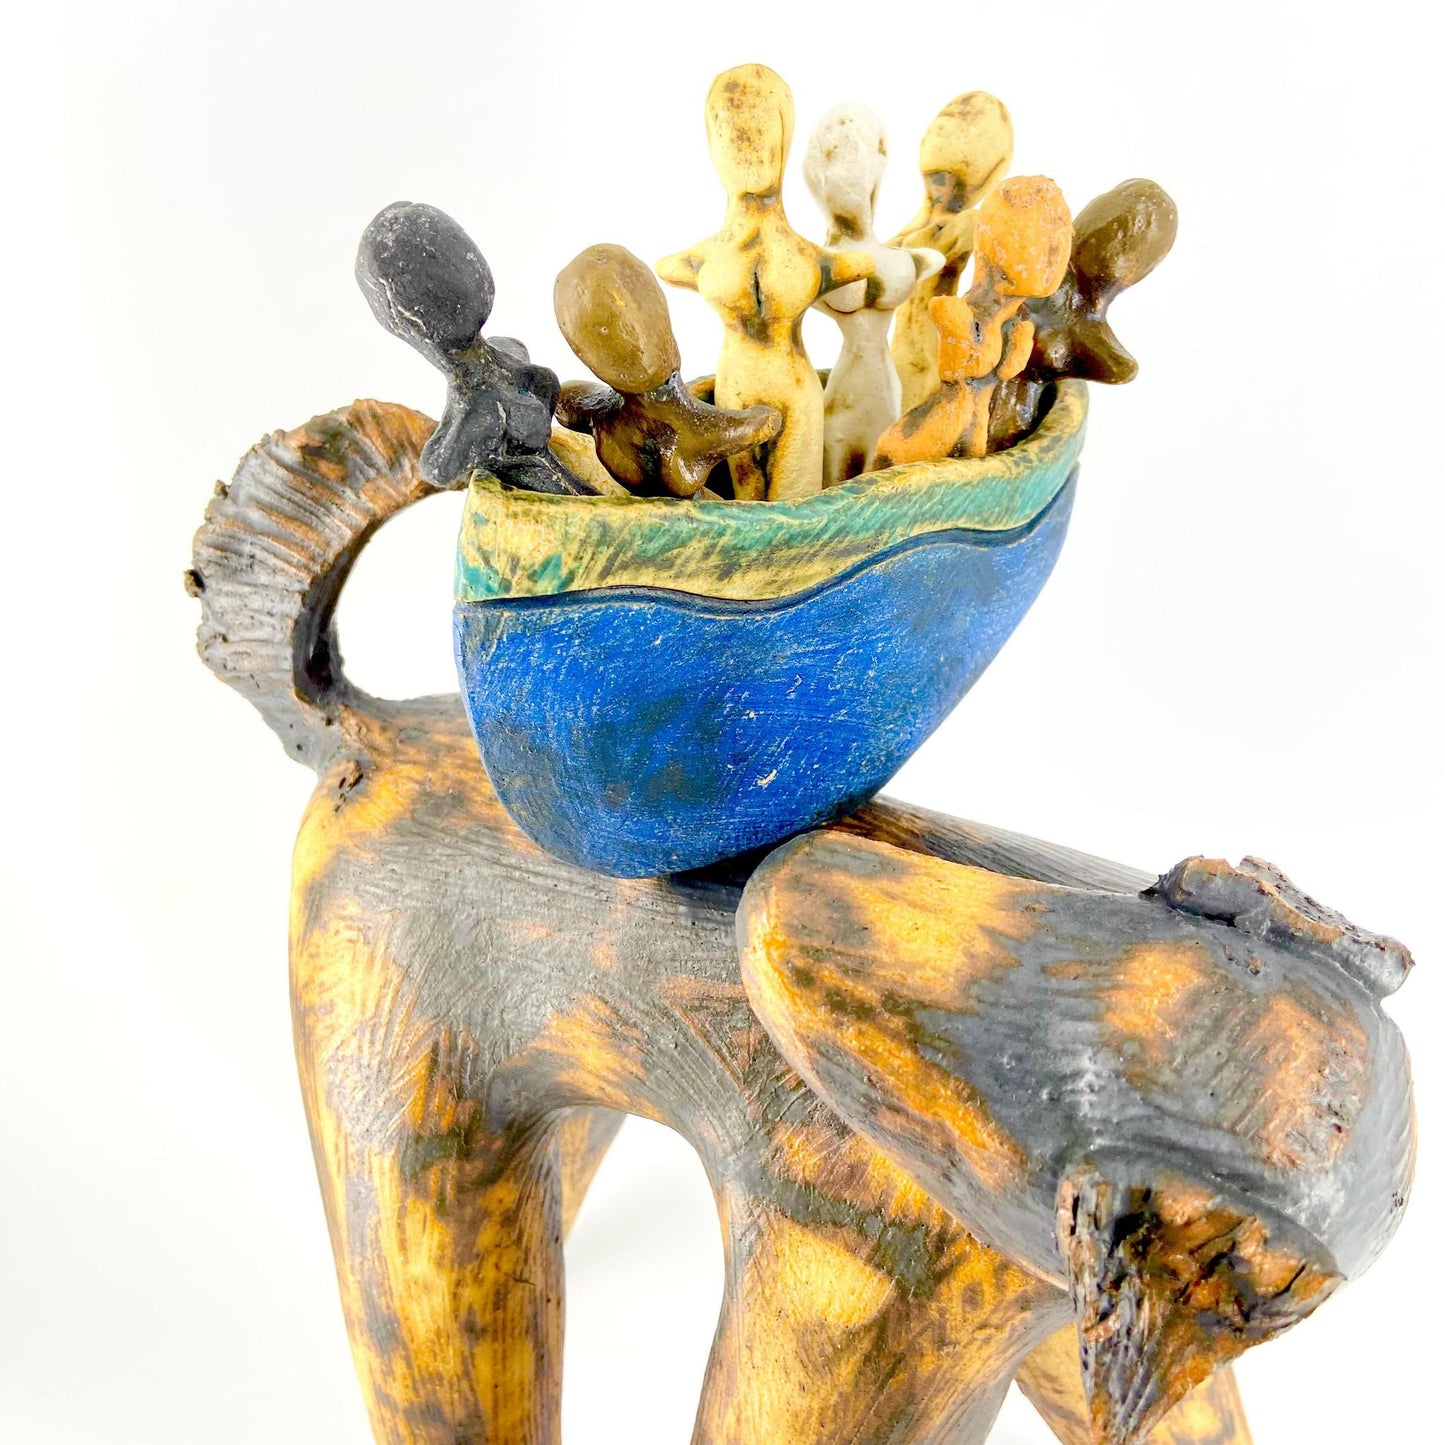 Sculpture - Dog with Boat/Filled with People - Ceramic - Large